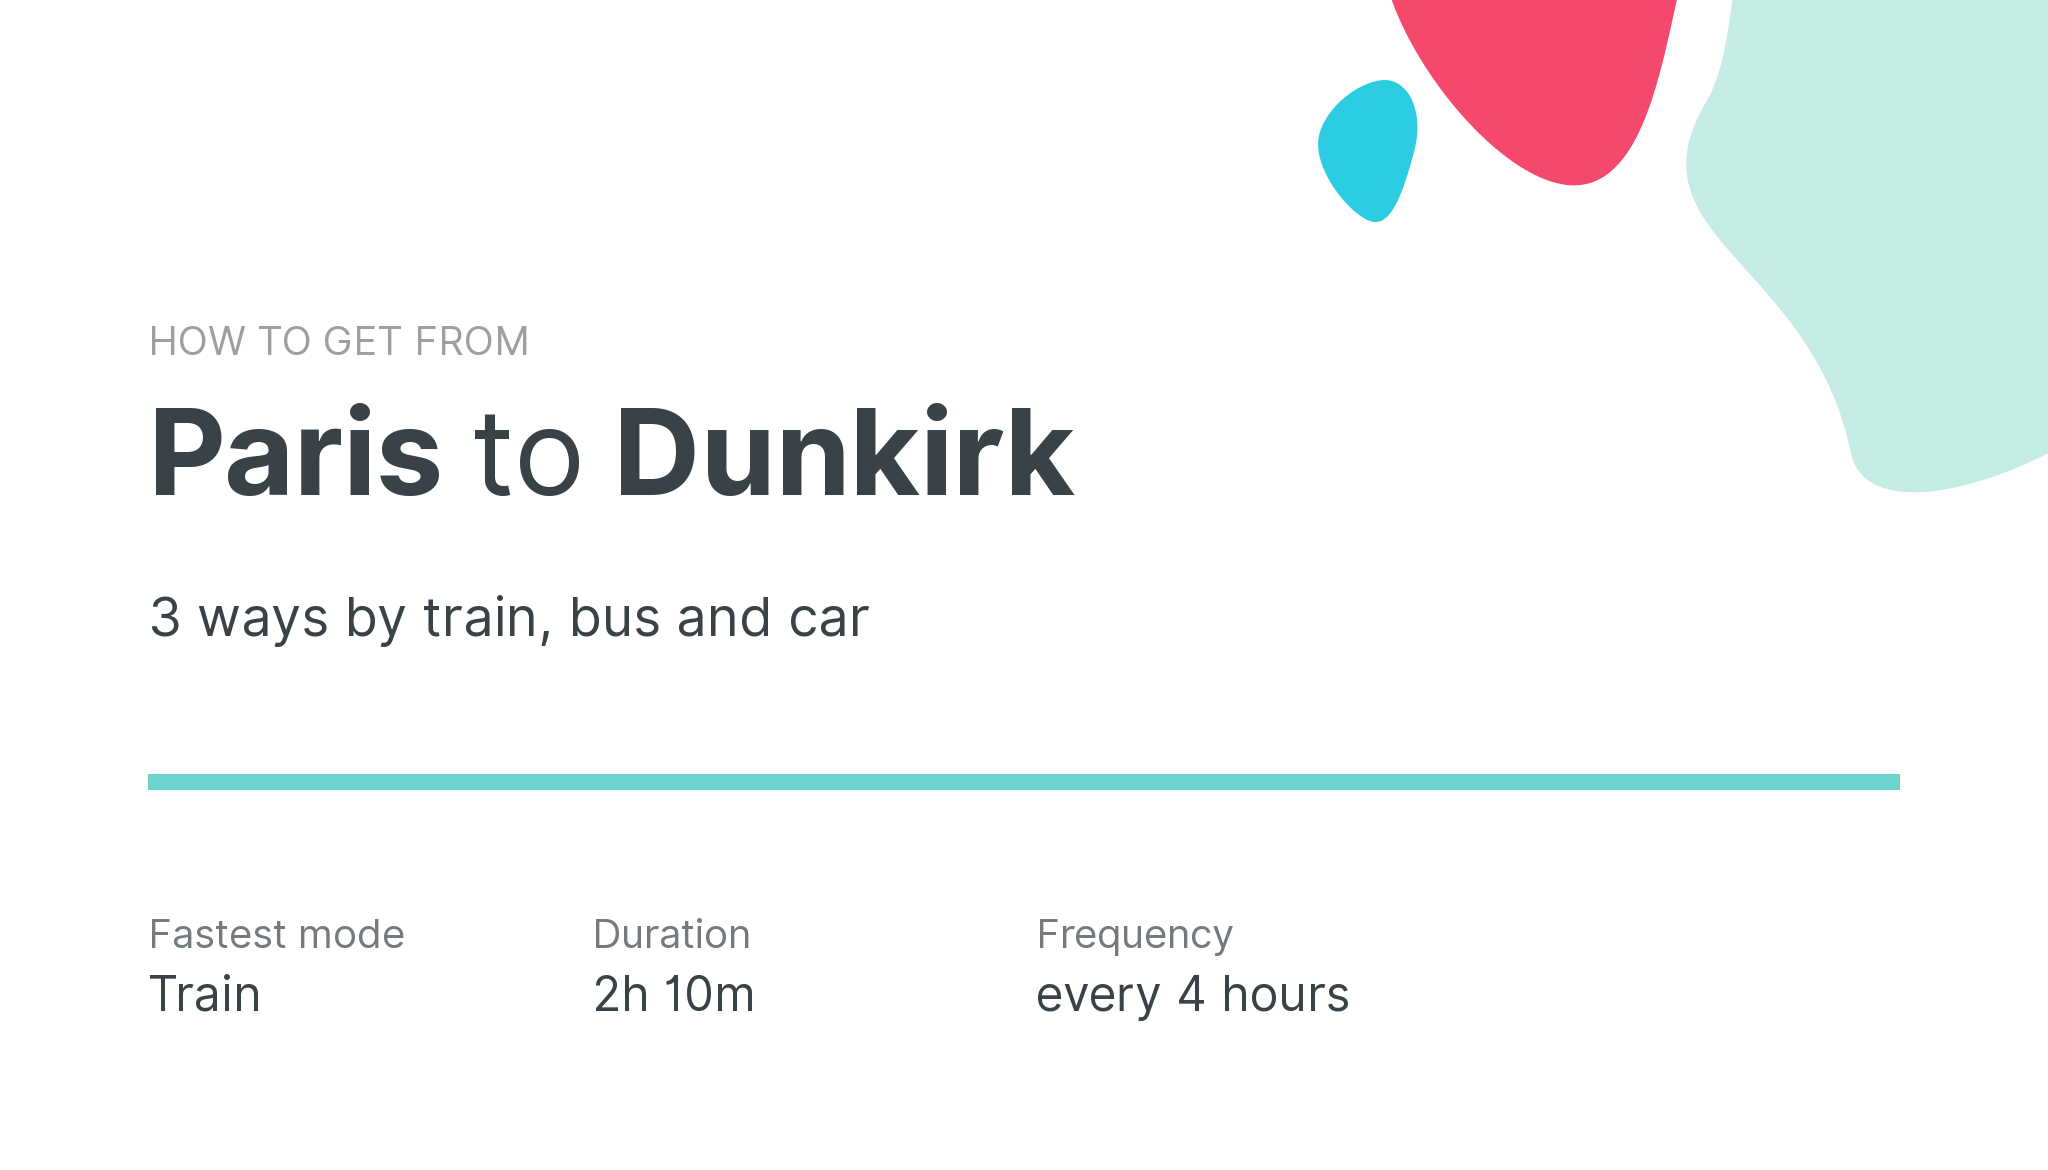 How do I get from Paris to Dunkirk